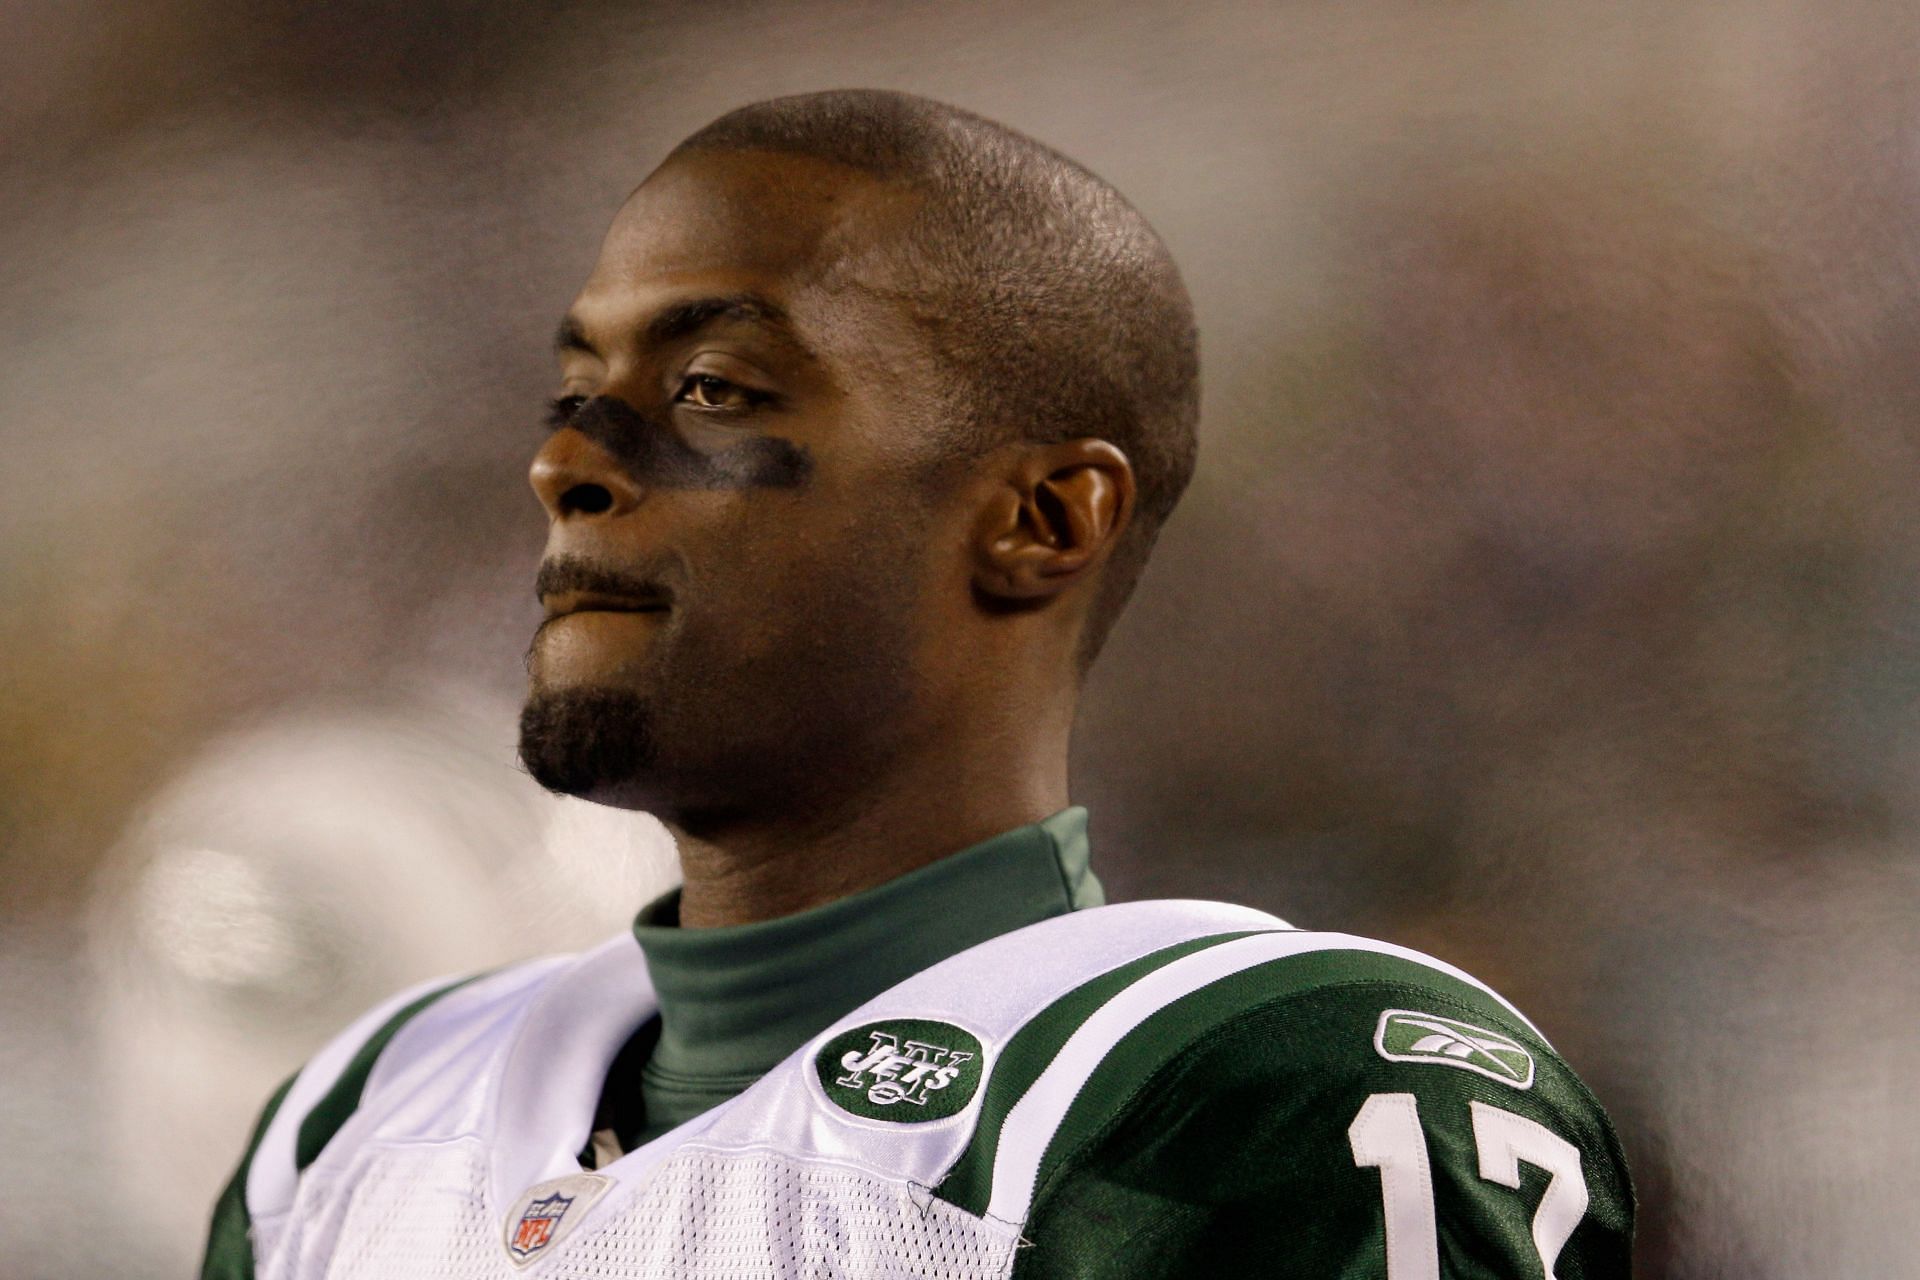 NFL teams gave Plaxico Burress a chance to rebuild his career after prison